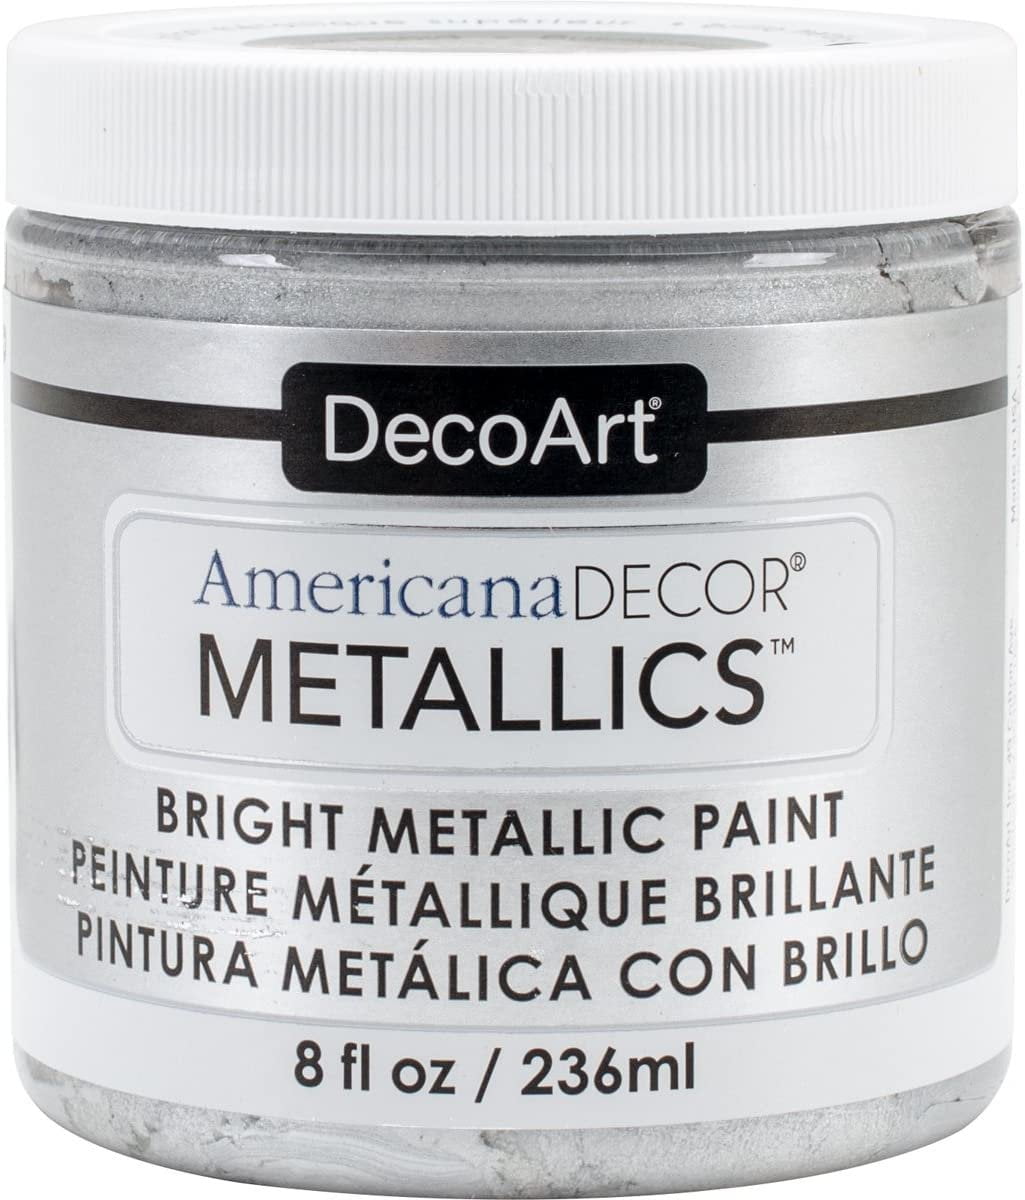  DecoArt Americana Decor Metallics 24K Gold Paint - 2 Pack 8oz  Metallic 24K Gold Acrylic Paint - Water Based Multi Surface Paint for Arts  and Crafts, Home Decor, Wall Decor, Gilding